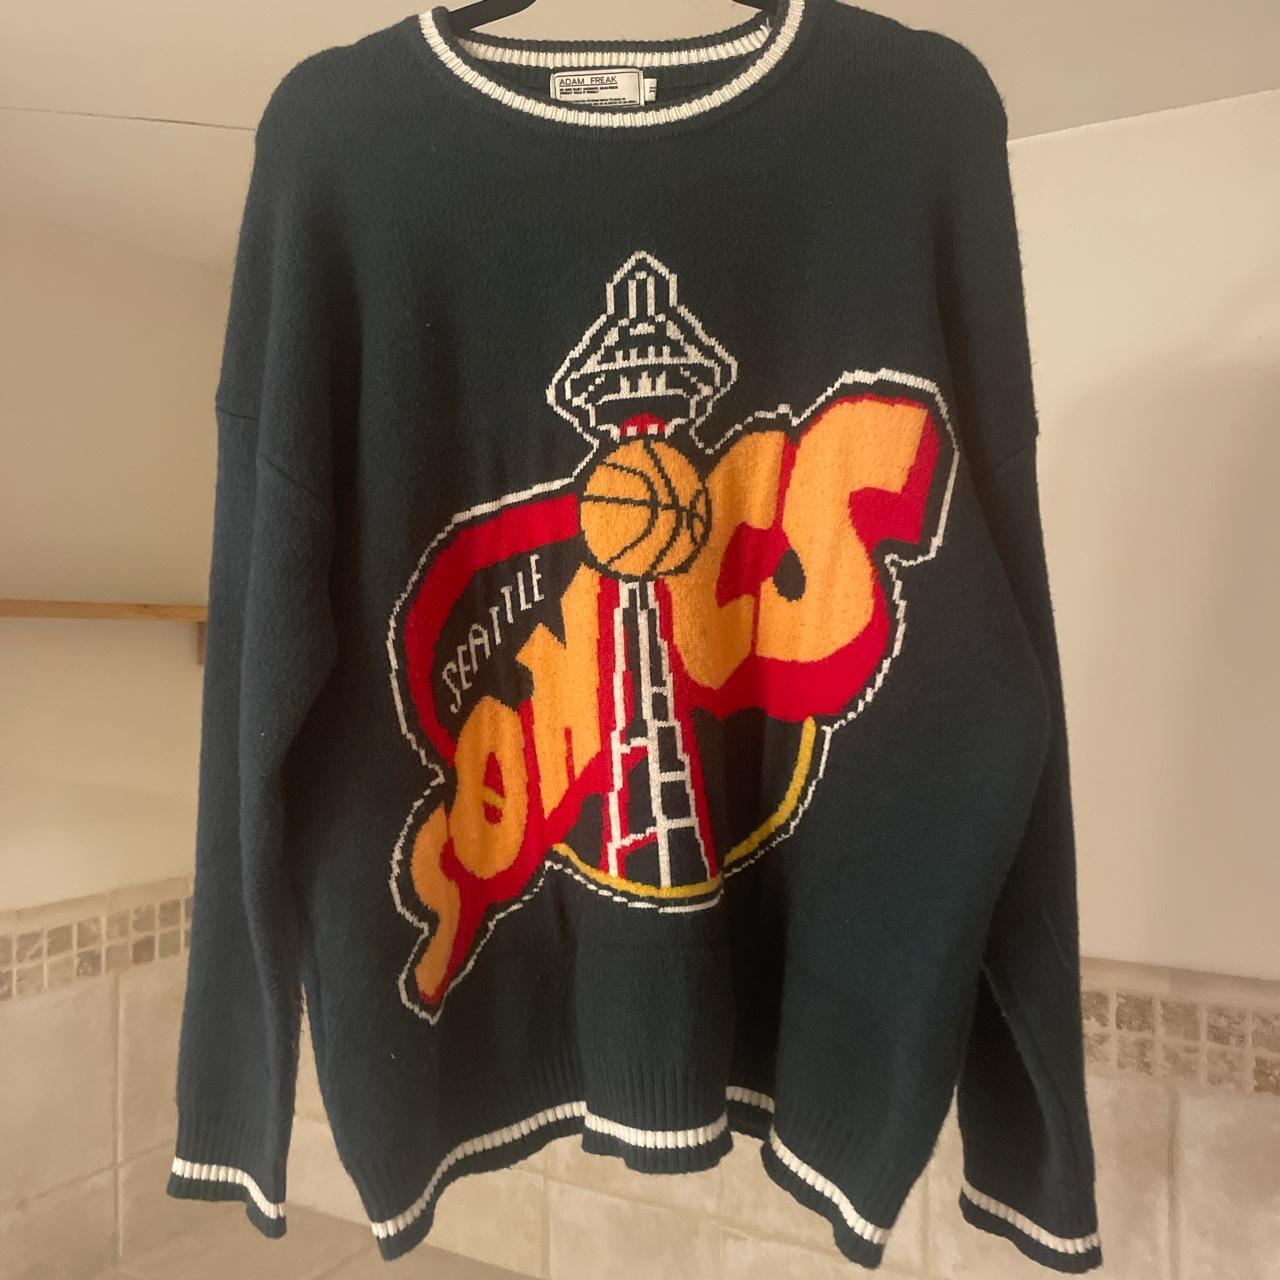 Vintage 90s Seattle Sonics knit sweater with the... - Depop